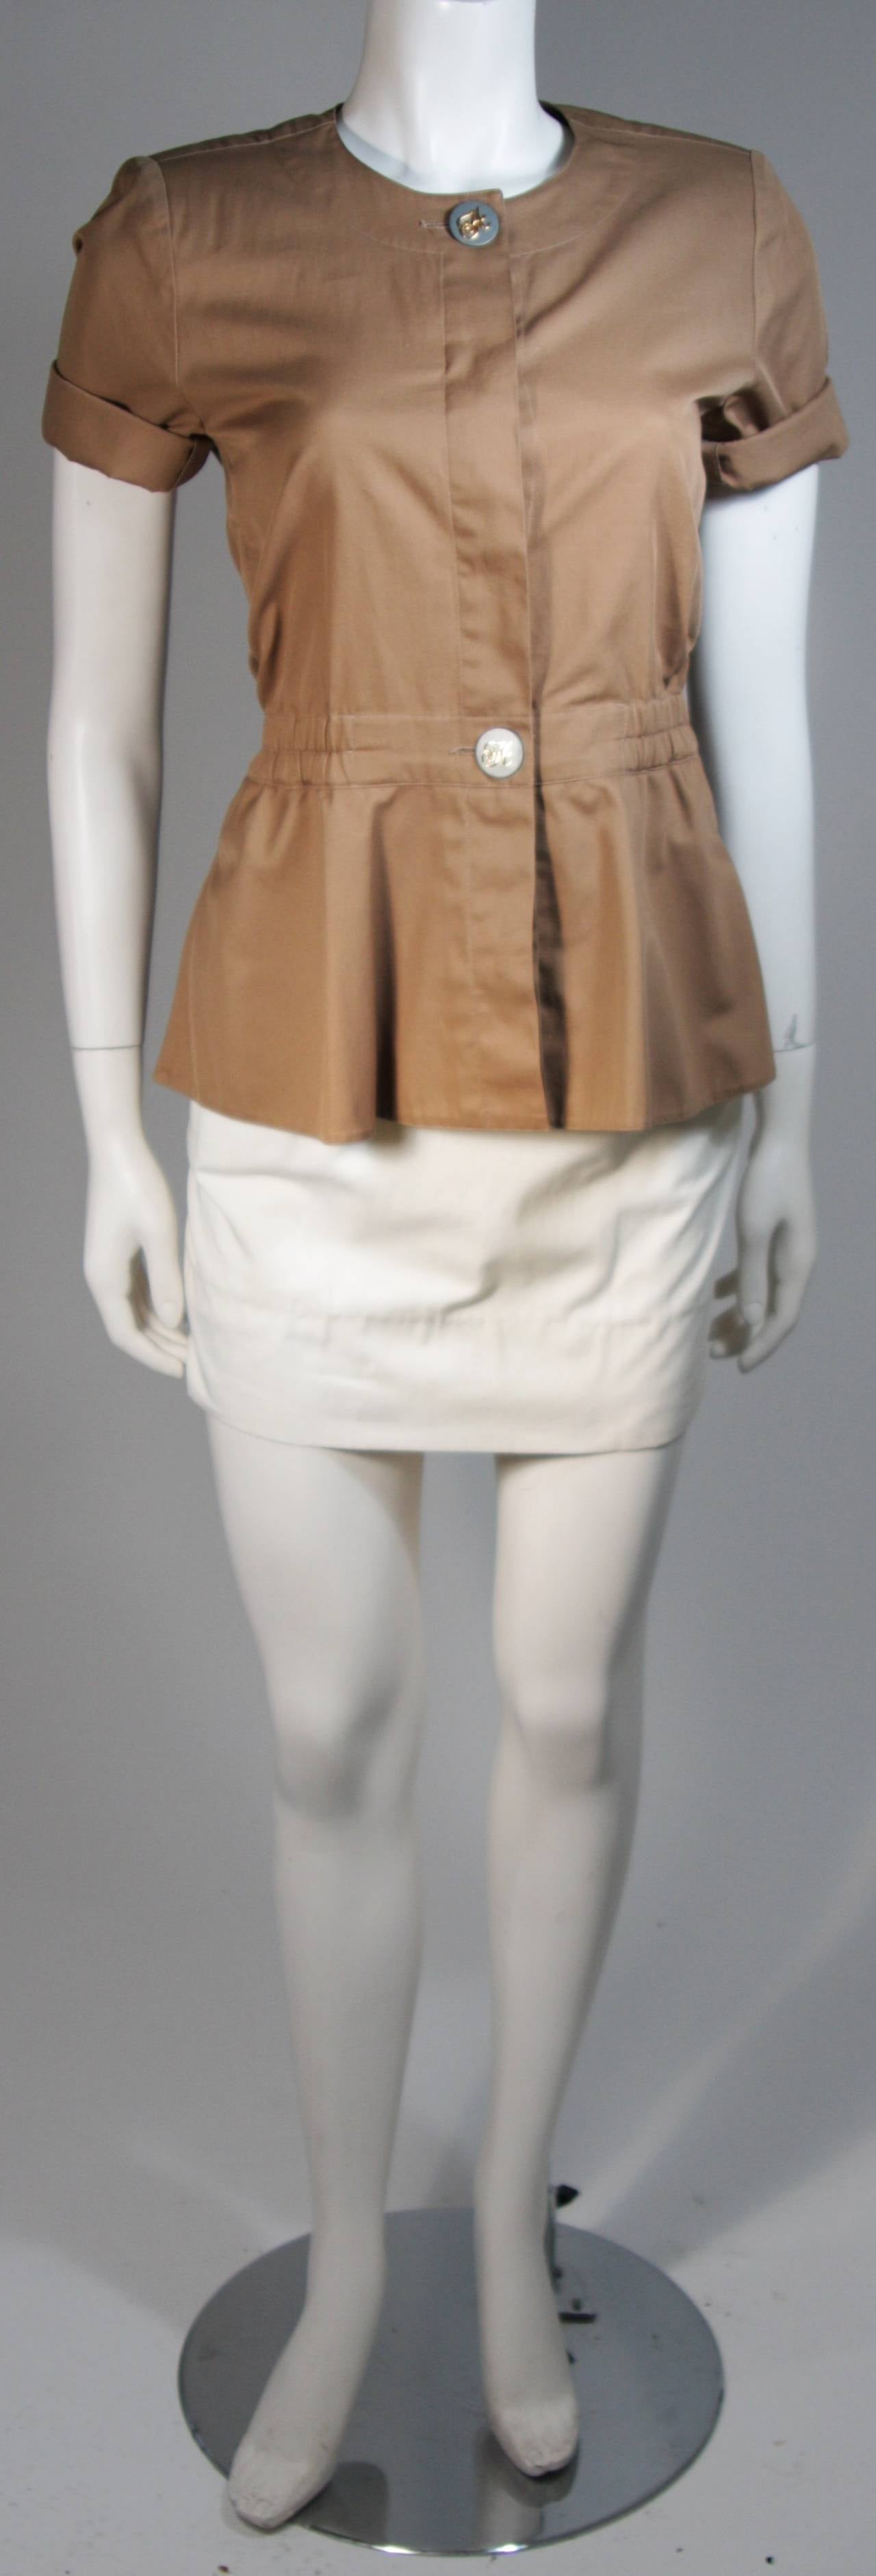 This Hermes skirt suit is composed of a white and camel khaki combination. The jacket/blouse has center front button closures, and an elastic waist detail. The skirt has a zipper closure with front pockets and pleats. In excellent vintage condition.